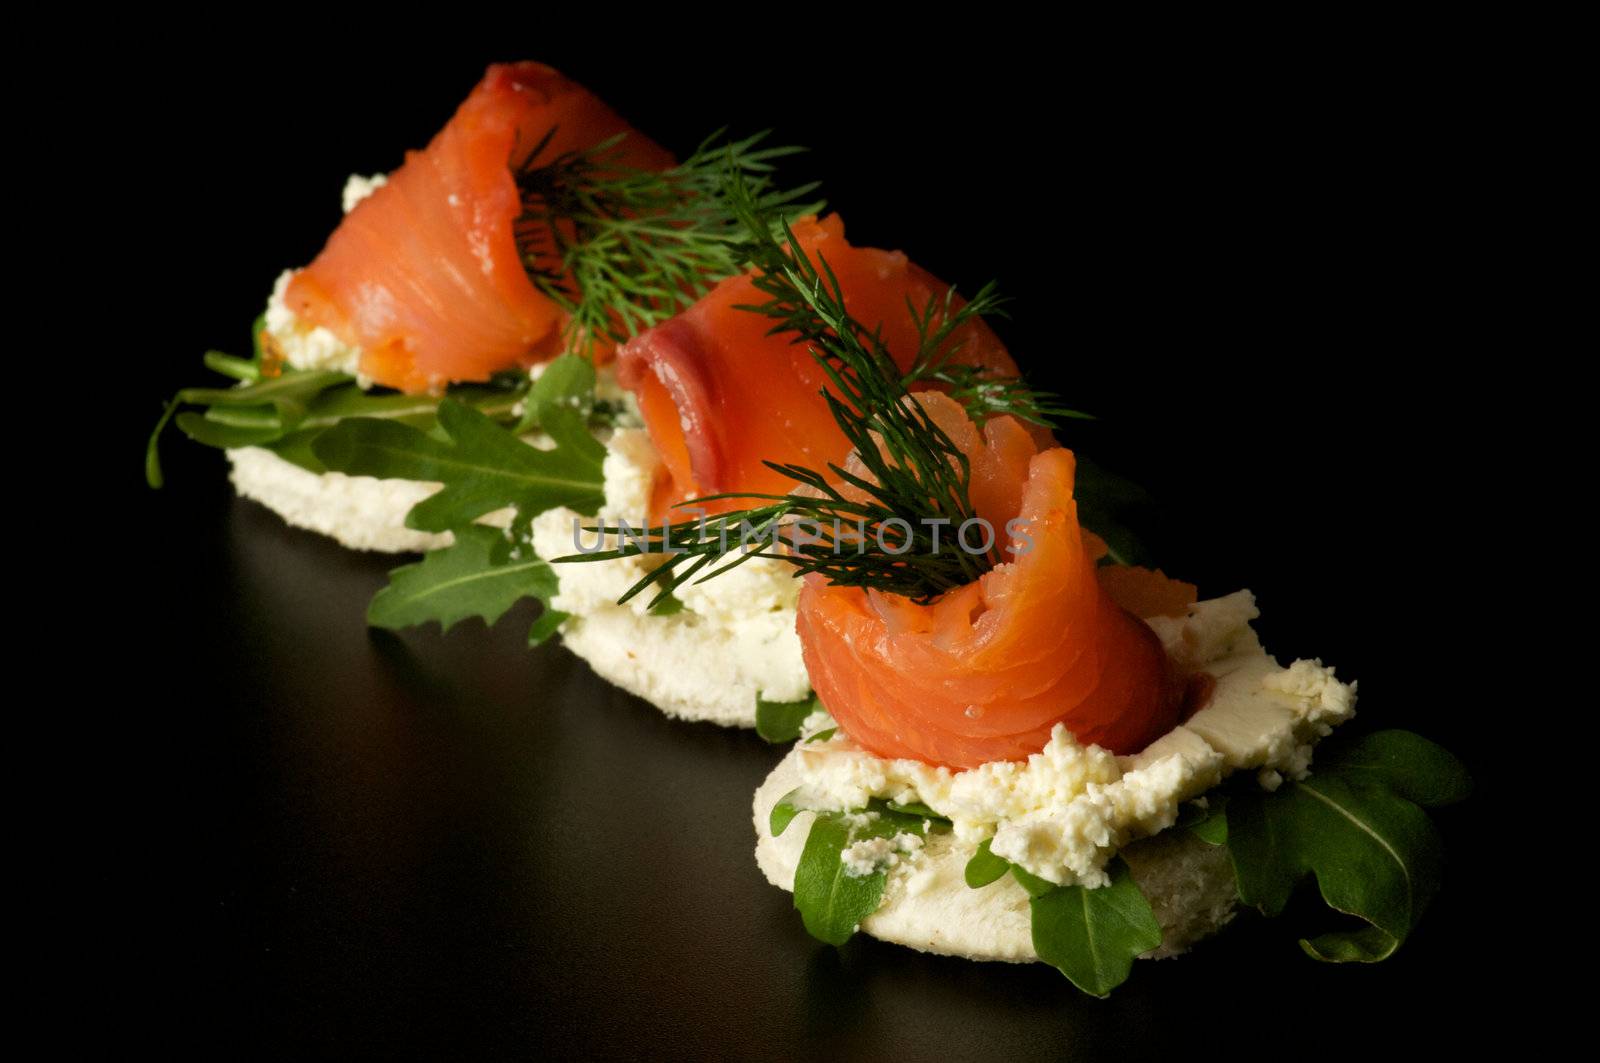 Appetizers Smoked salmon with dill on cracker isolated on black background